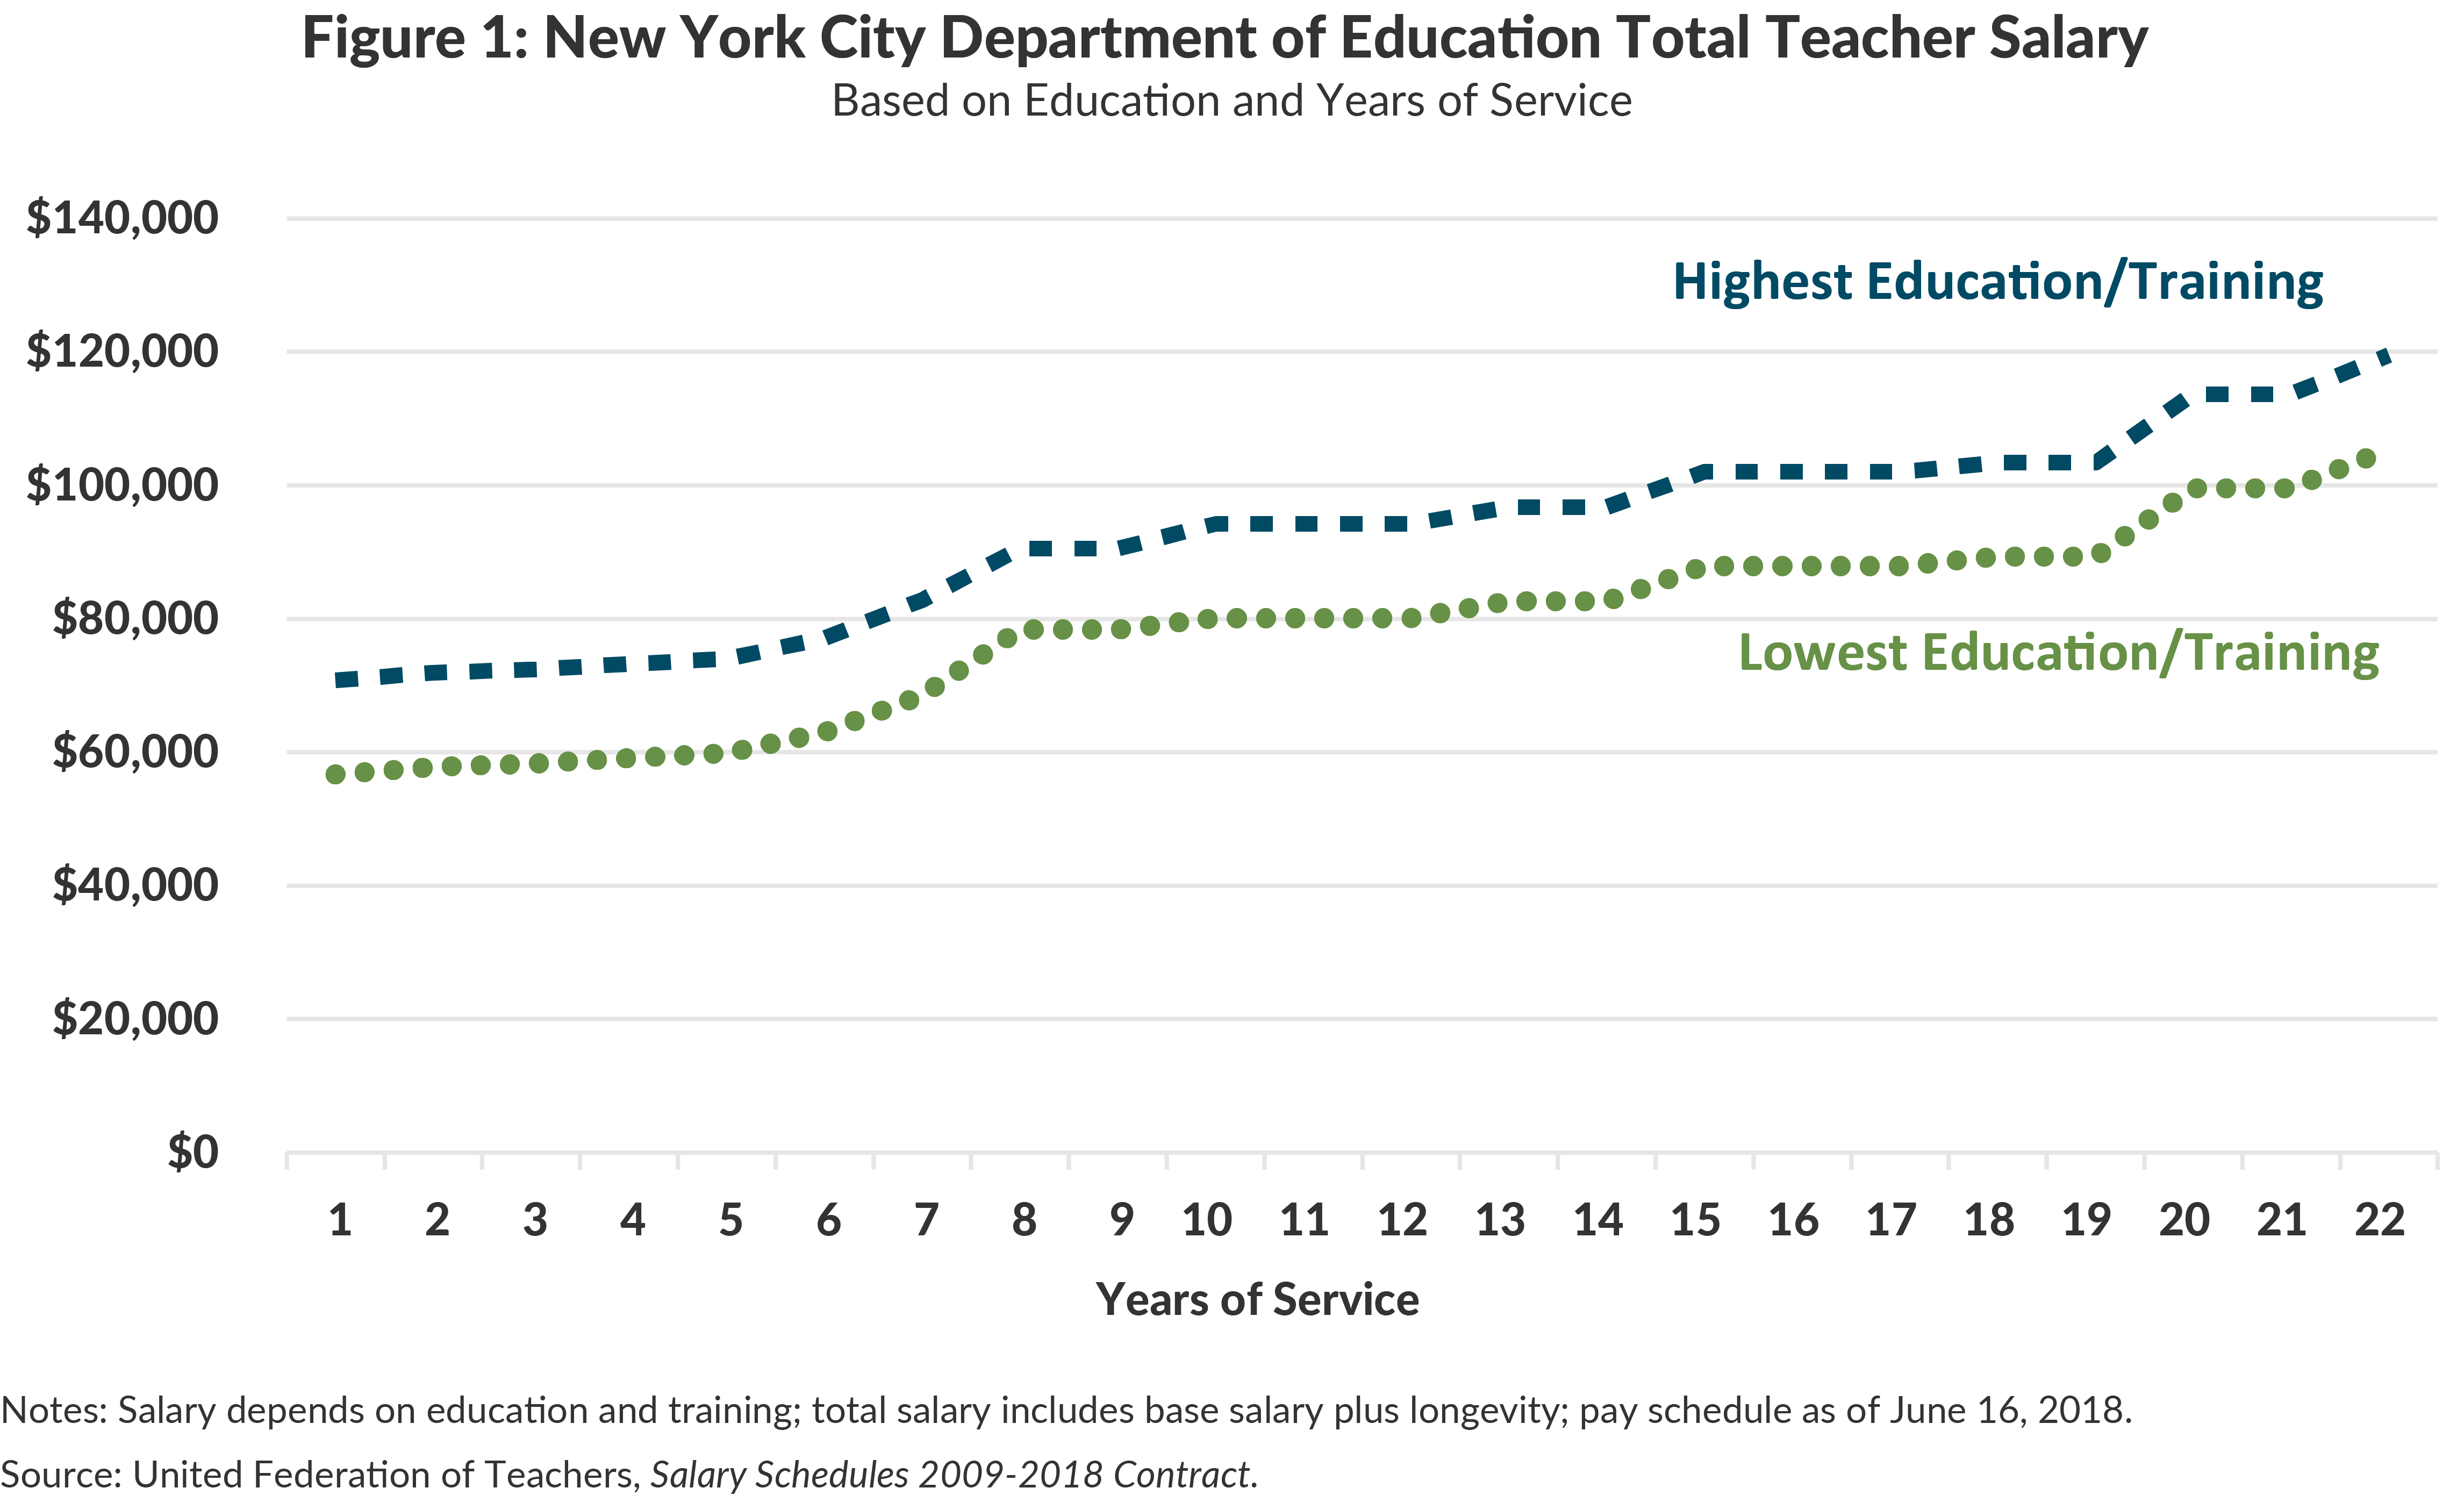 Absent Teacher Reserve Costs 136 Million and Needs Reform CBCNY